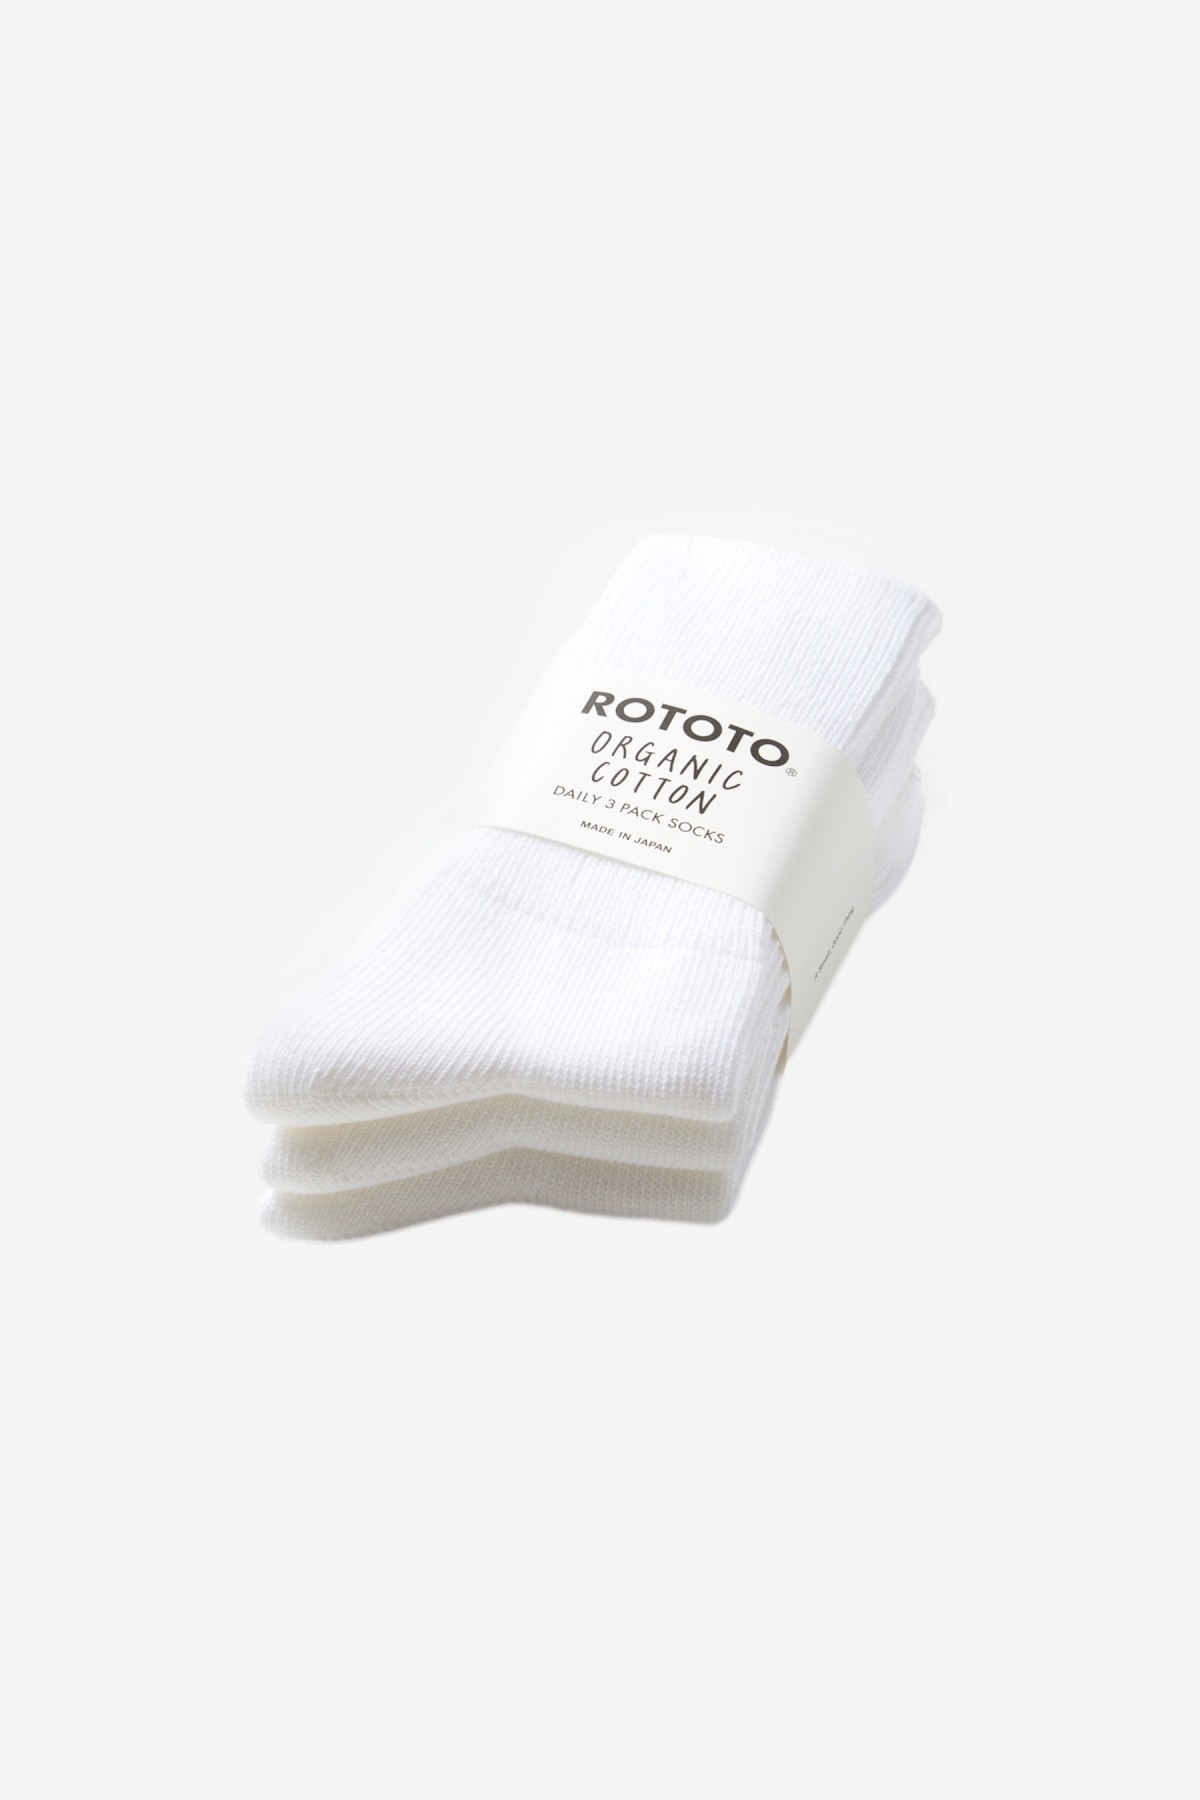 RoToTo Organic Daily 3 Pack Ribbed in White